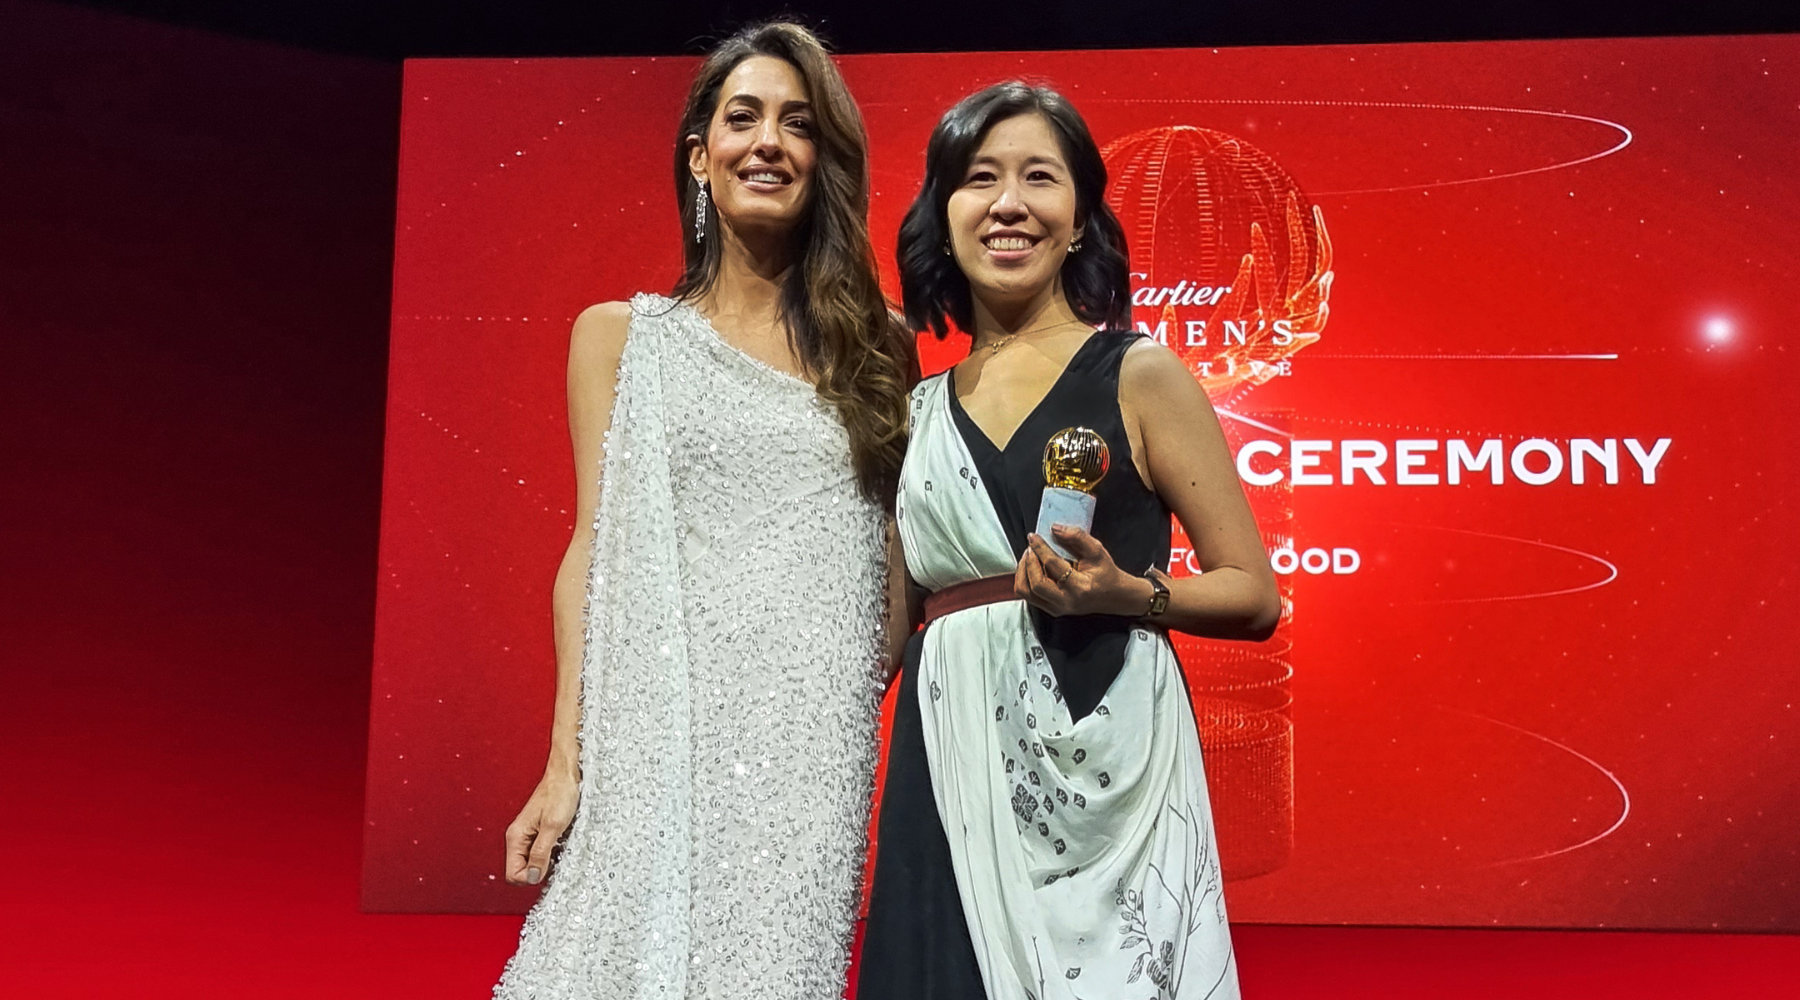 Cartier Women’s Initiative Awards: Celebrating Our Ibus With the World